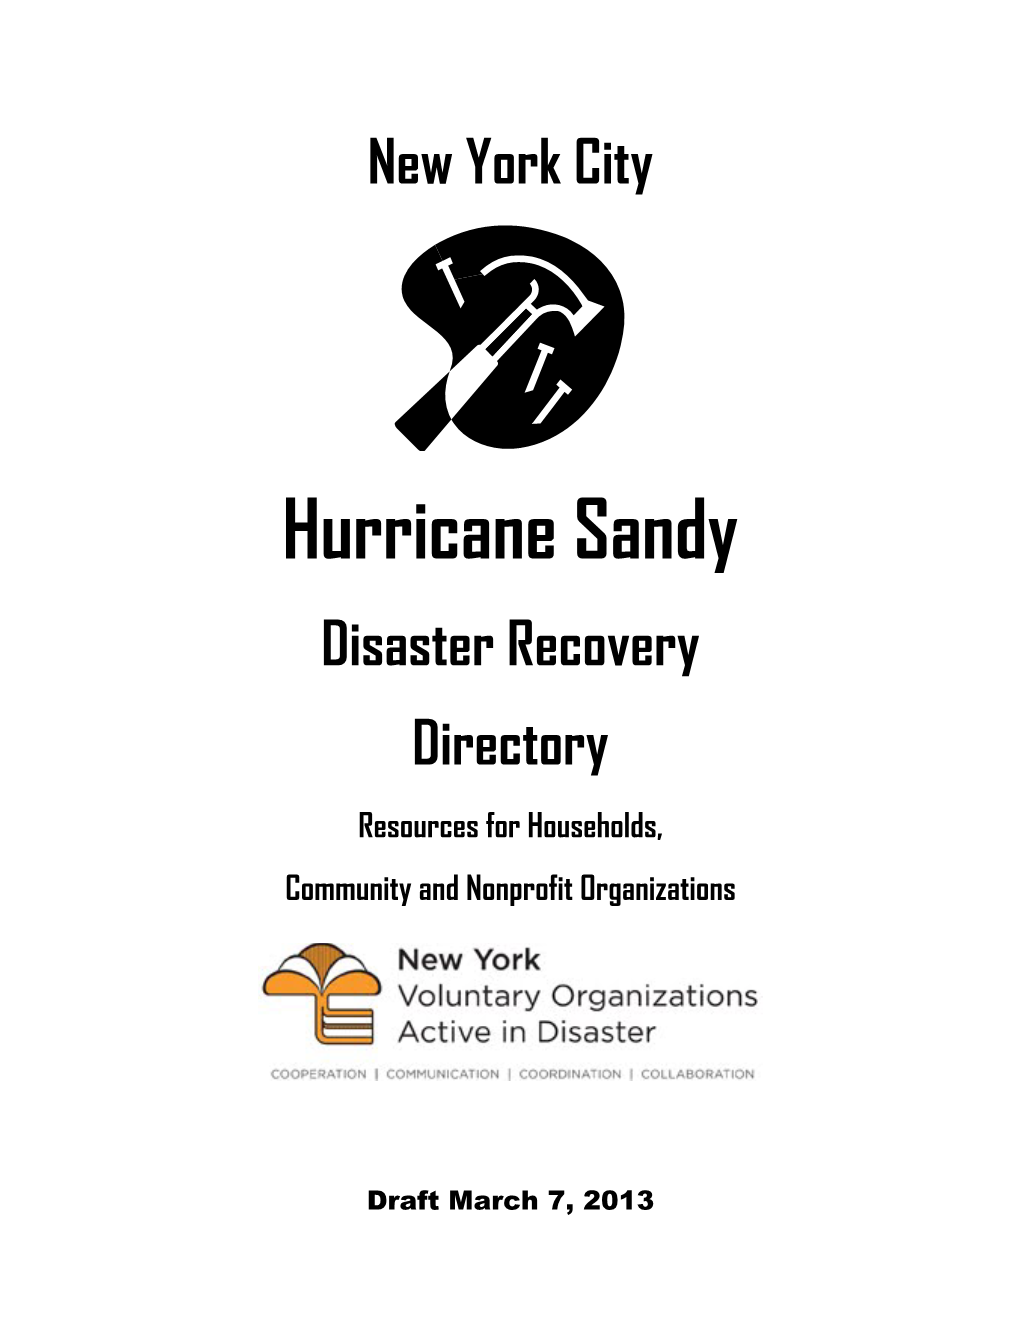 NYC Hurricane Sandy Disaster Recovery Directory